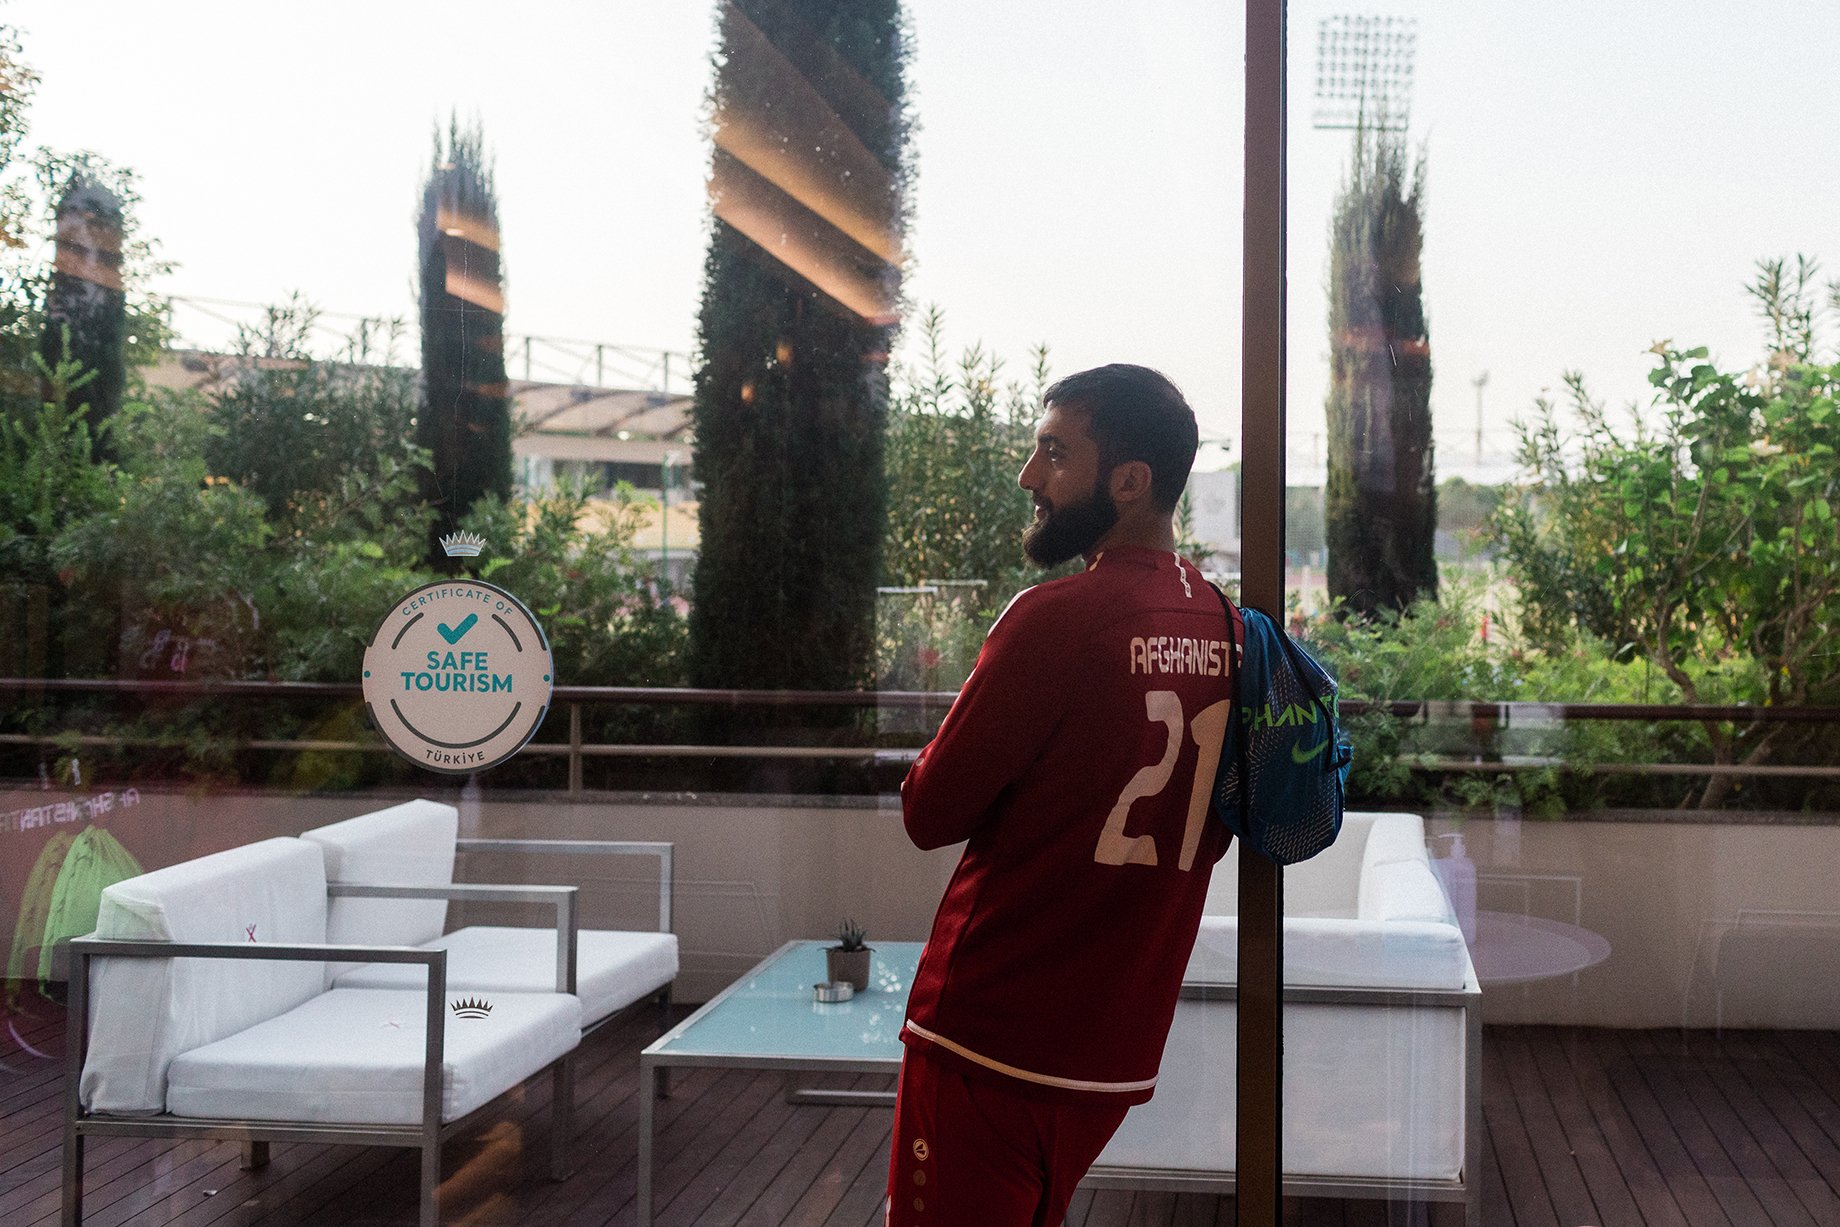 Sharif Mukhammad, a player on the Afghan national soccer team, stands in a hotel near the pitch before a training session. Shot by Bradley Secker for the New York Times.